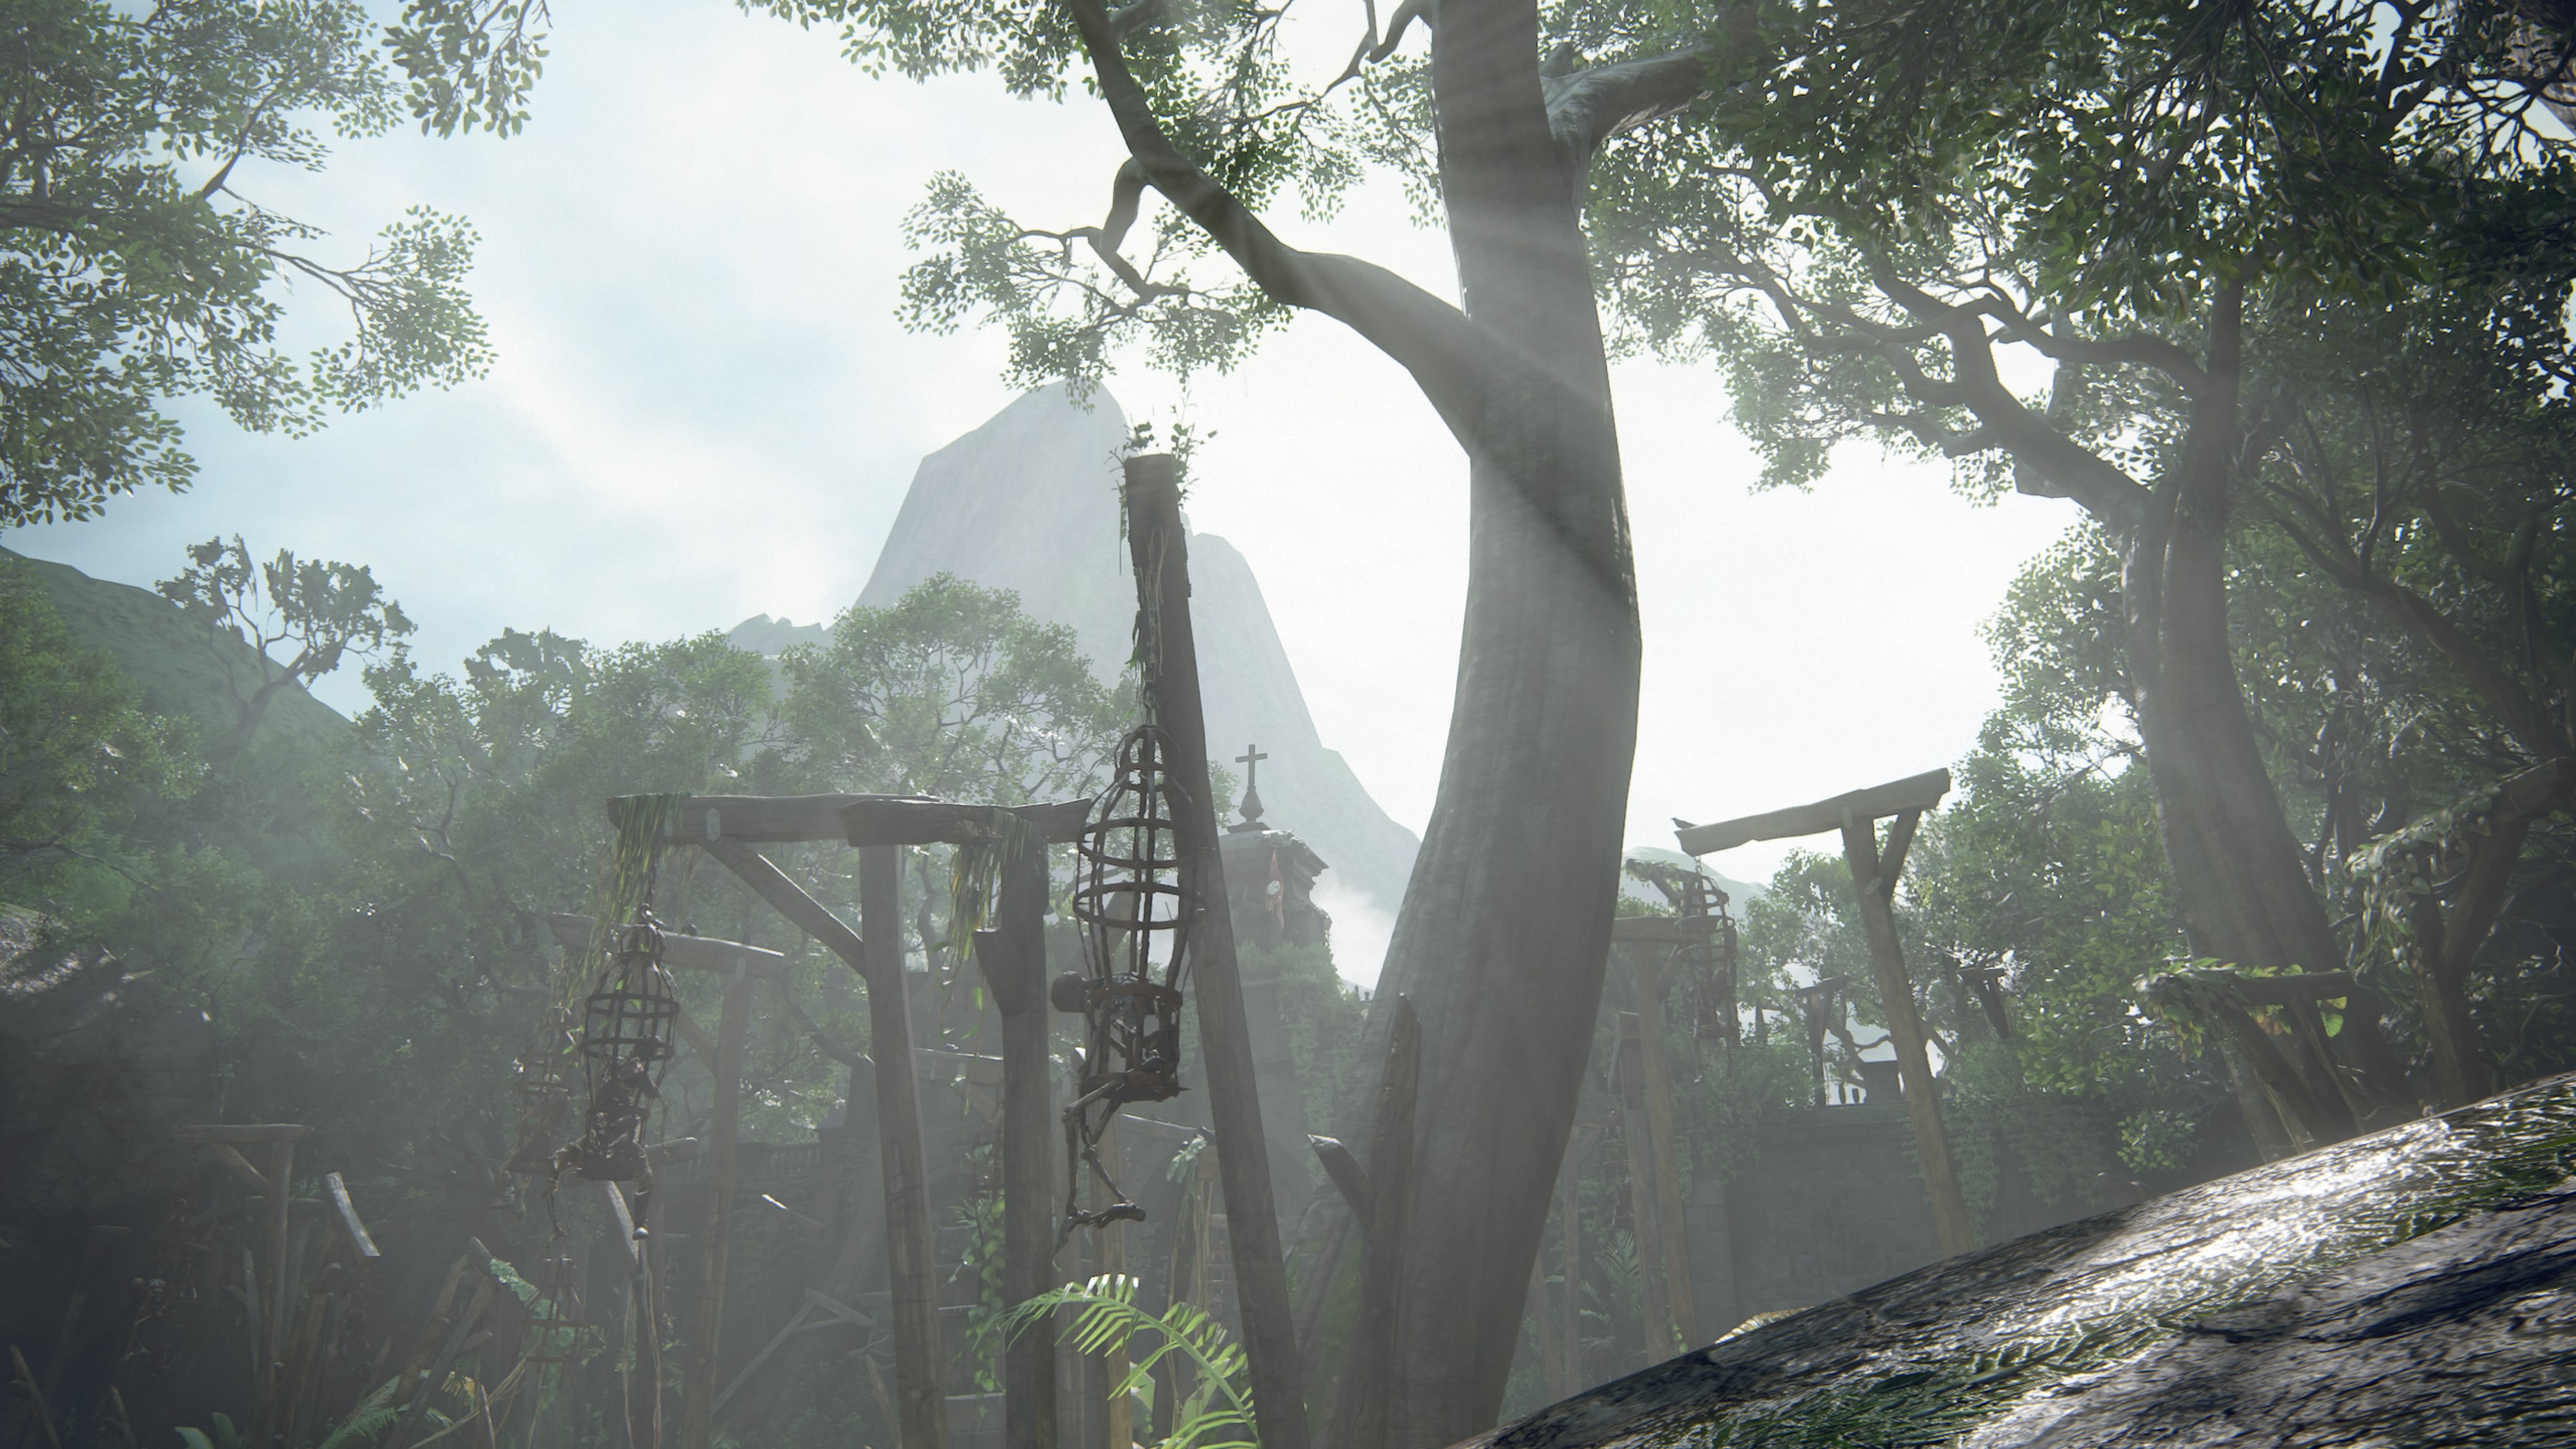 General 3840x2160 Uncharted 4: A Thief's End trees mountains nature daylight birds cross uncharted  Naughty Dog